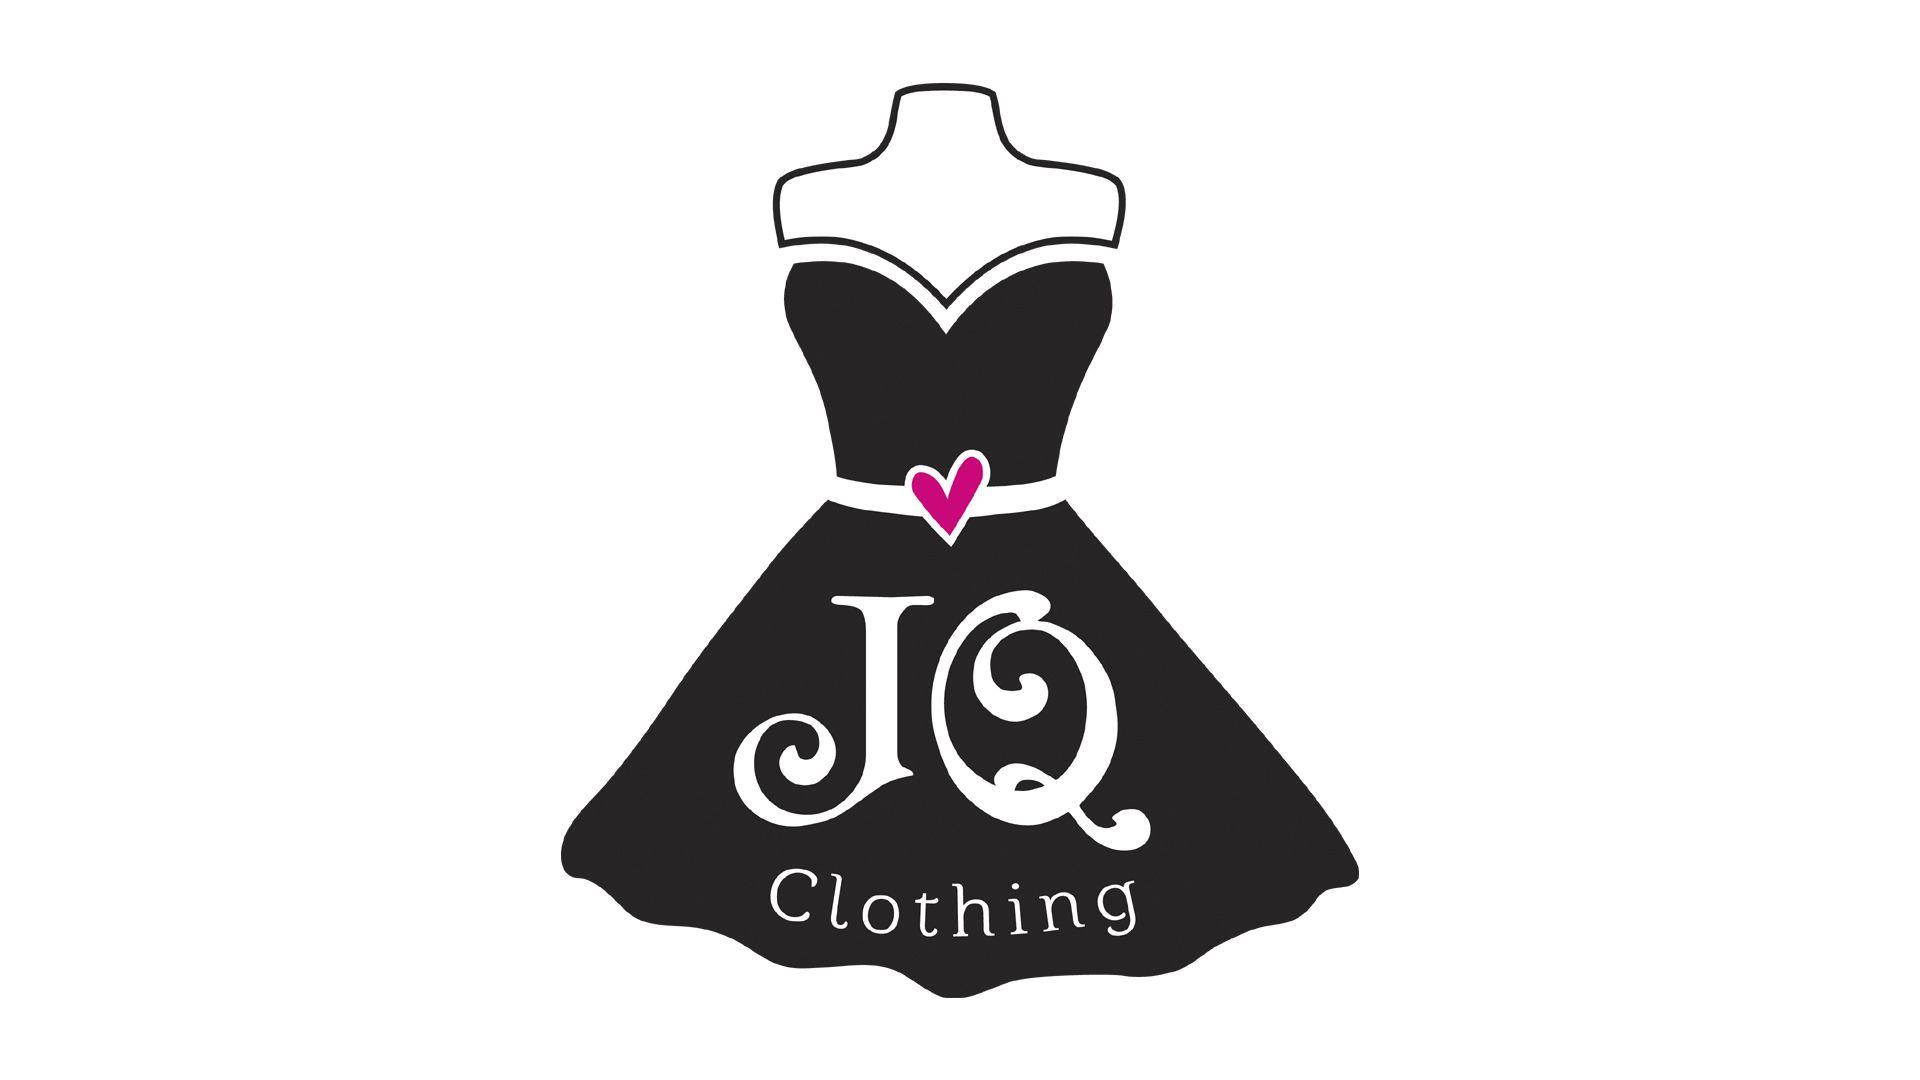 Clothin Logo - JQ Clothing Ltd. – 16 Years of Love, Laughter and Acceptance.